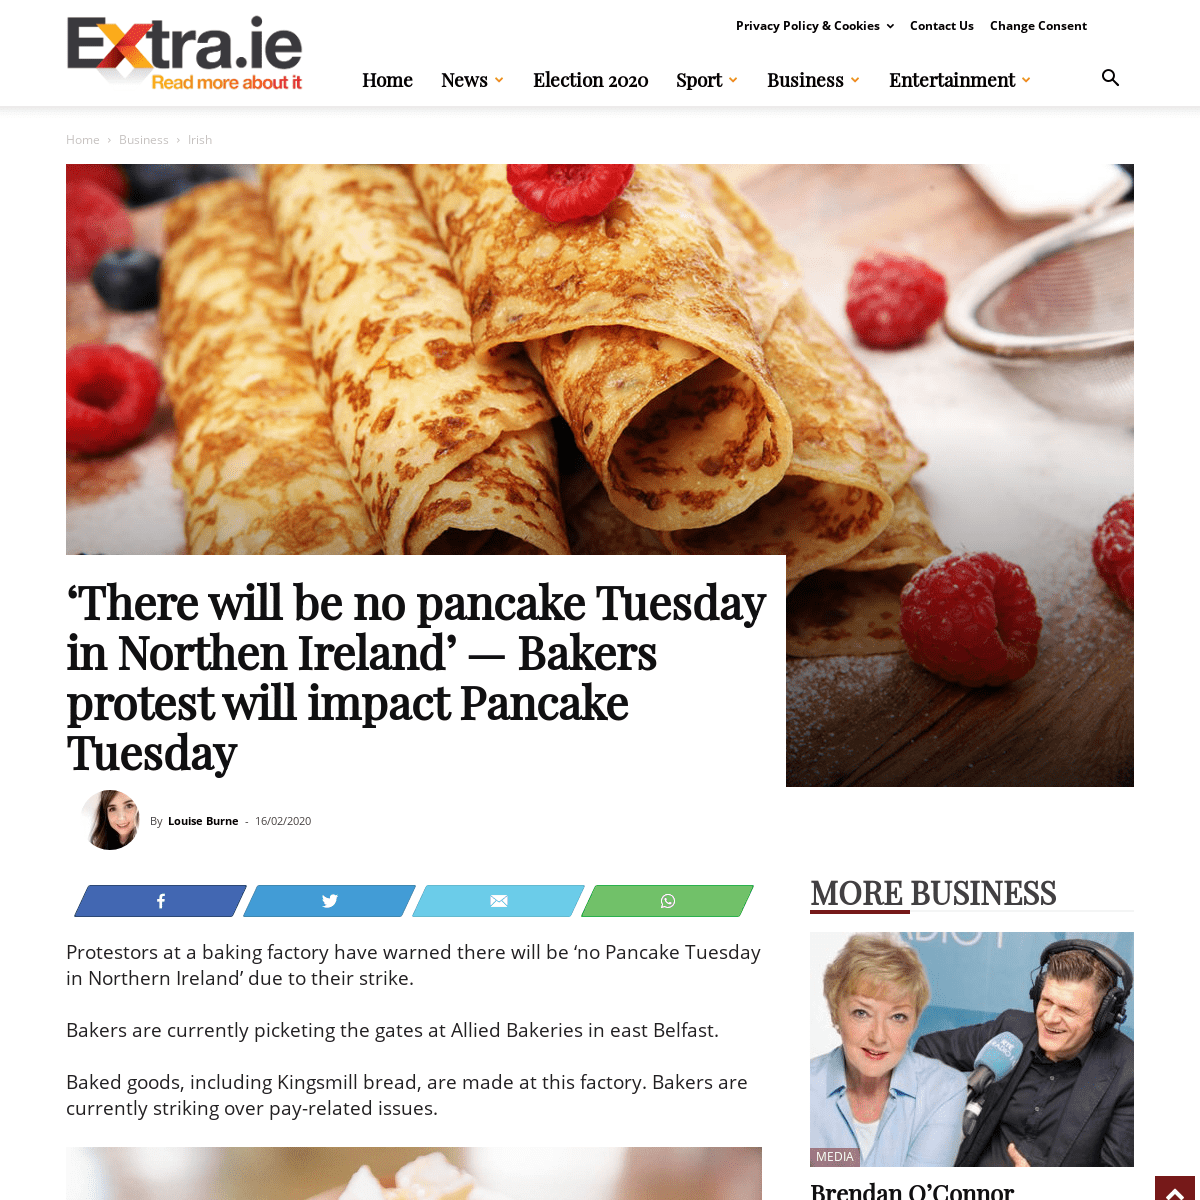 A complete backup of extra.ie/2020/02/16/business/irish/northern-ireland-baker-strike-pancake-tuesday